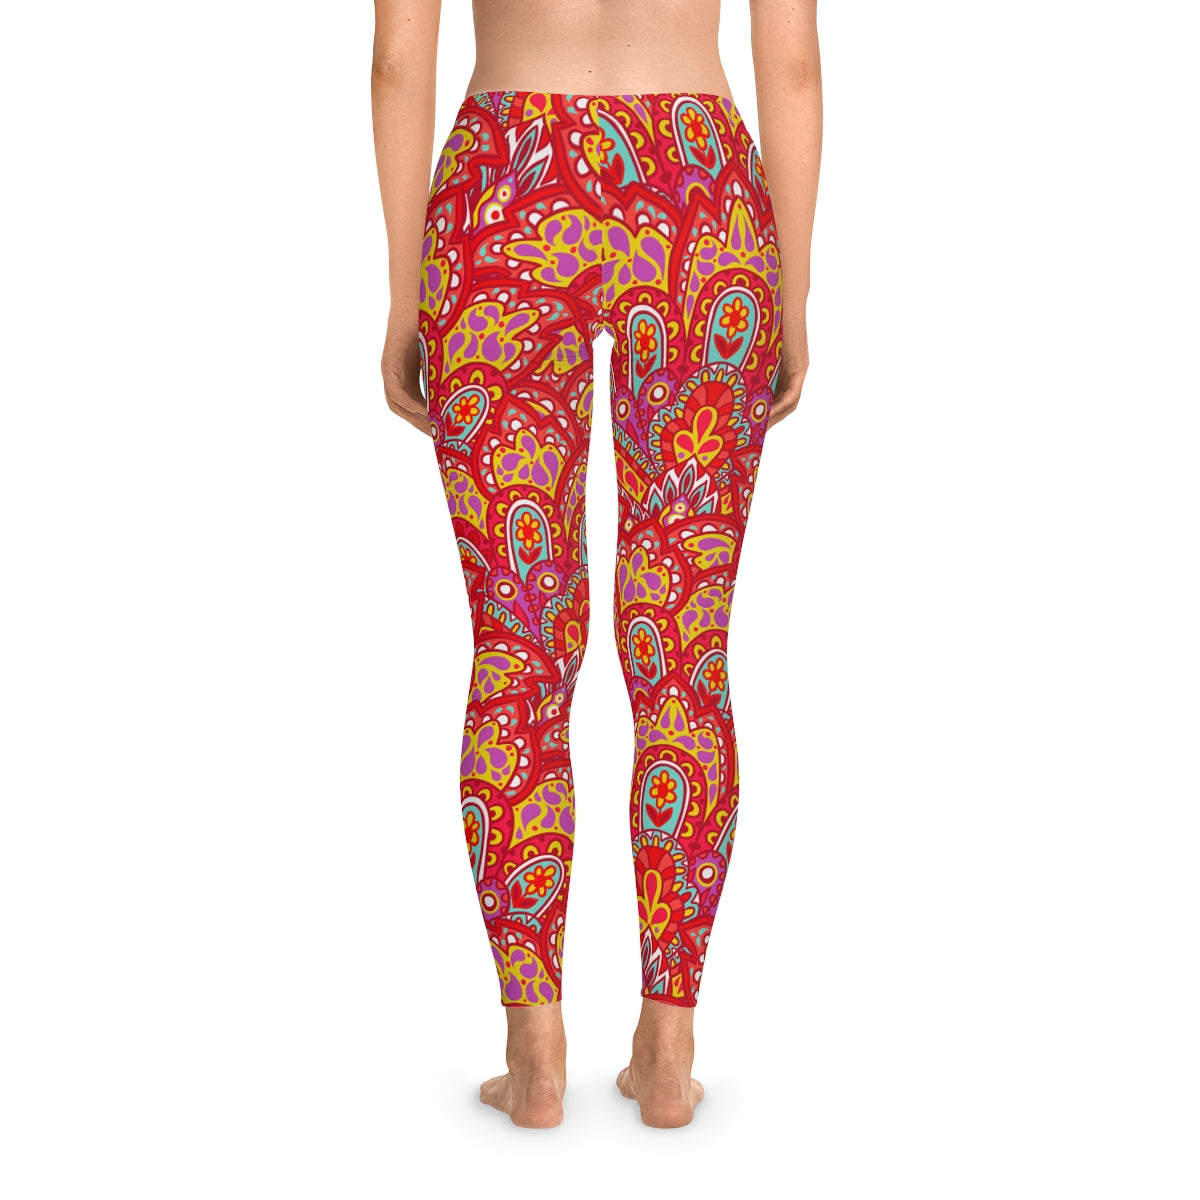 ELECTRIC RED PRINT - Stretchy Leggings